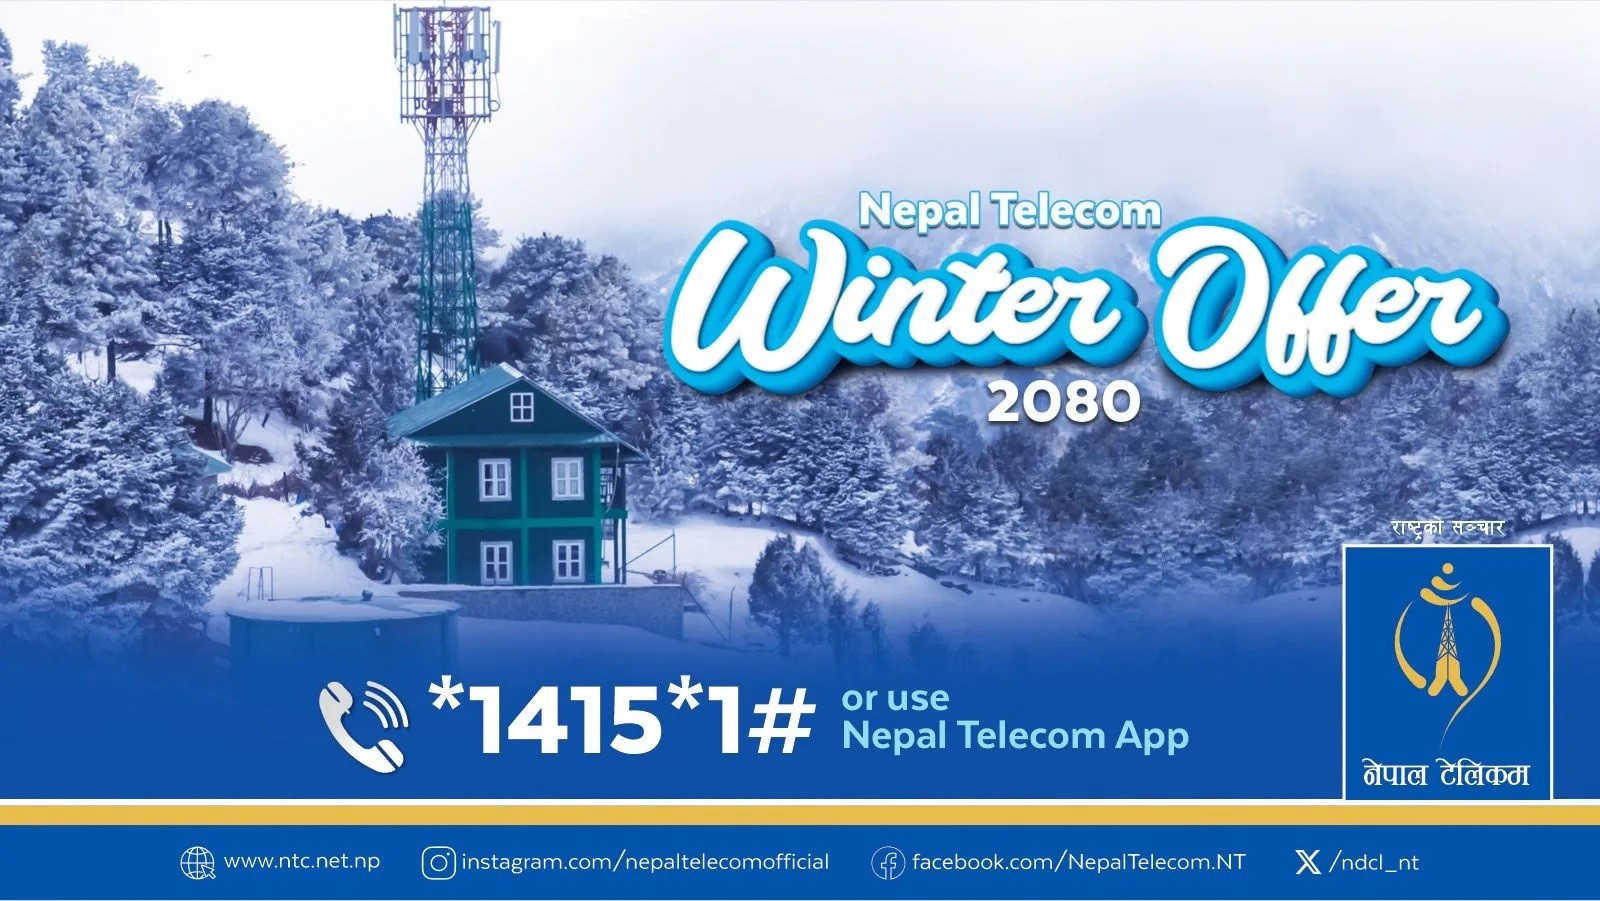 Nepal Telecom's Winter offer :  6 GB data for 109 rupees only